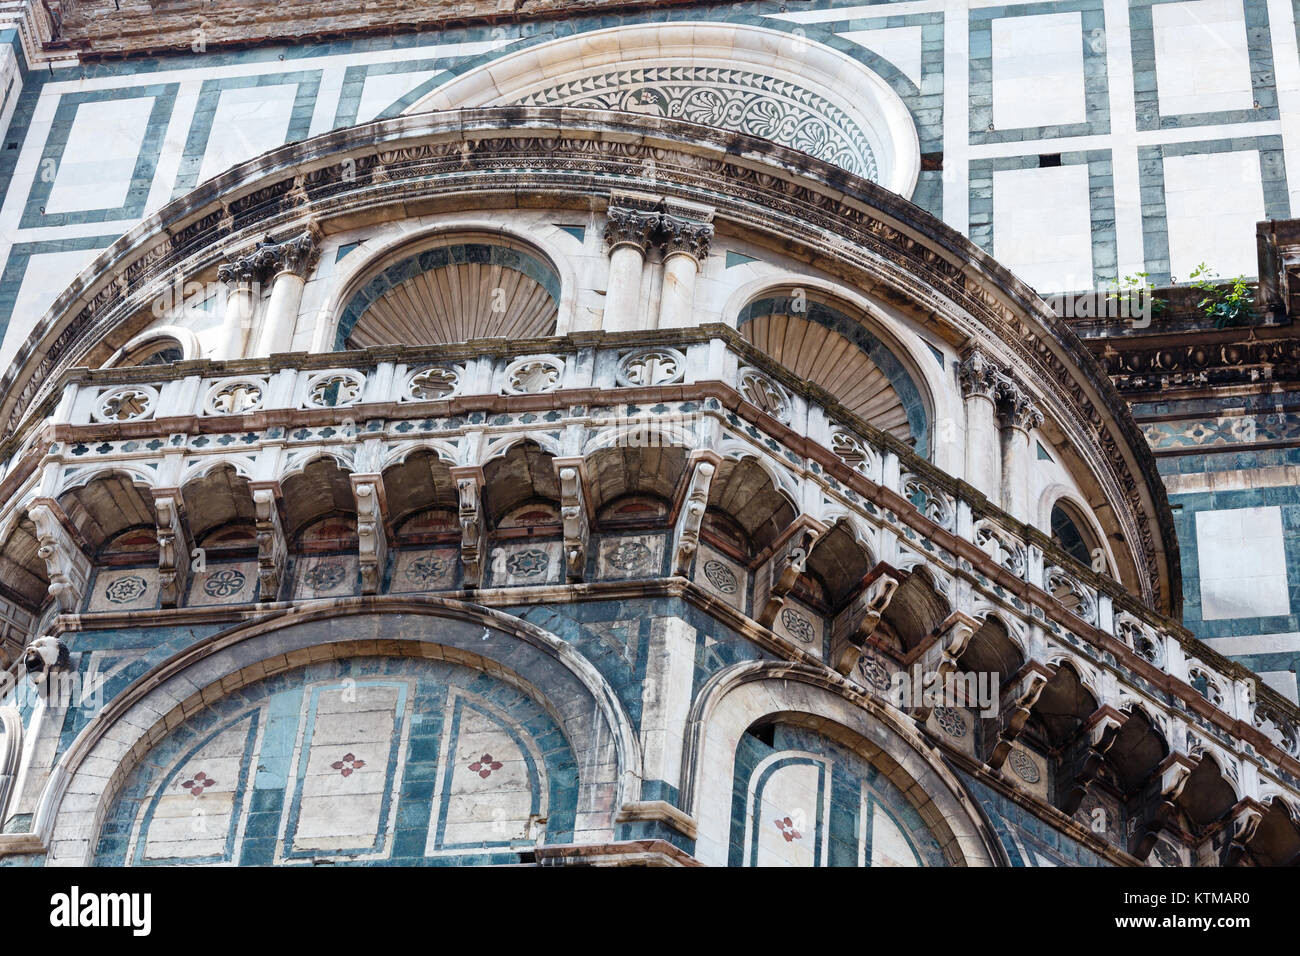 Cathedral of Santa Maria del Fiore (Duomo di Firenze) details. Florence the capital city of Tuscany region, Italy.  UNESCO World Heritage Site. Stock Photo